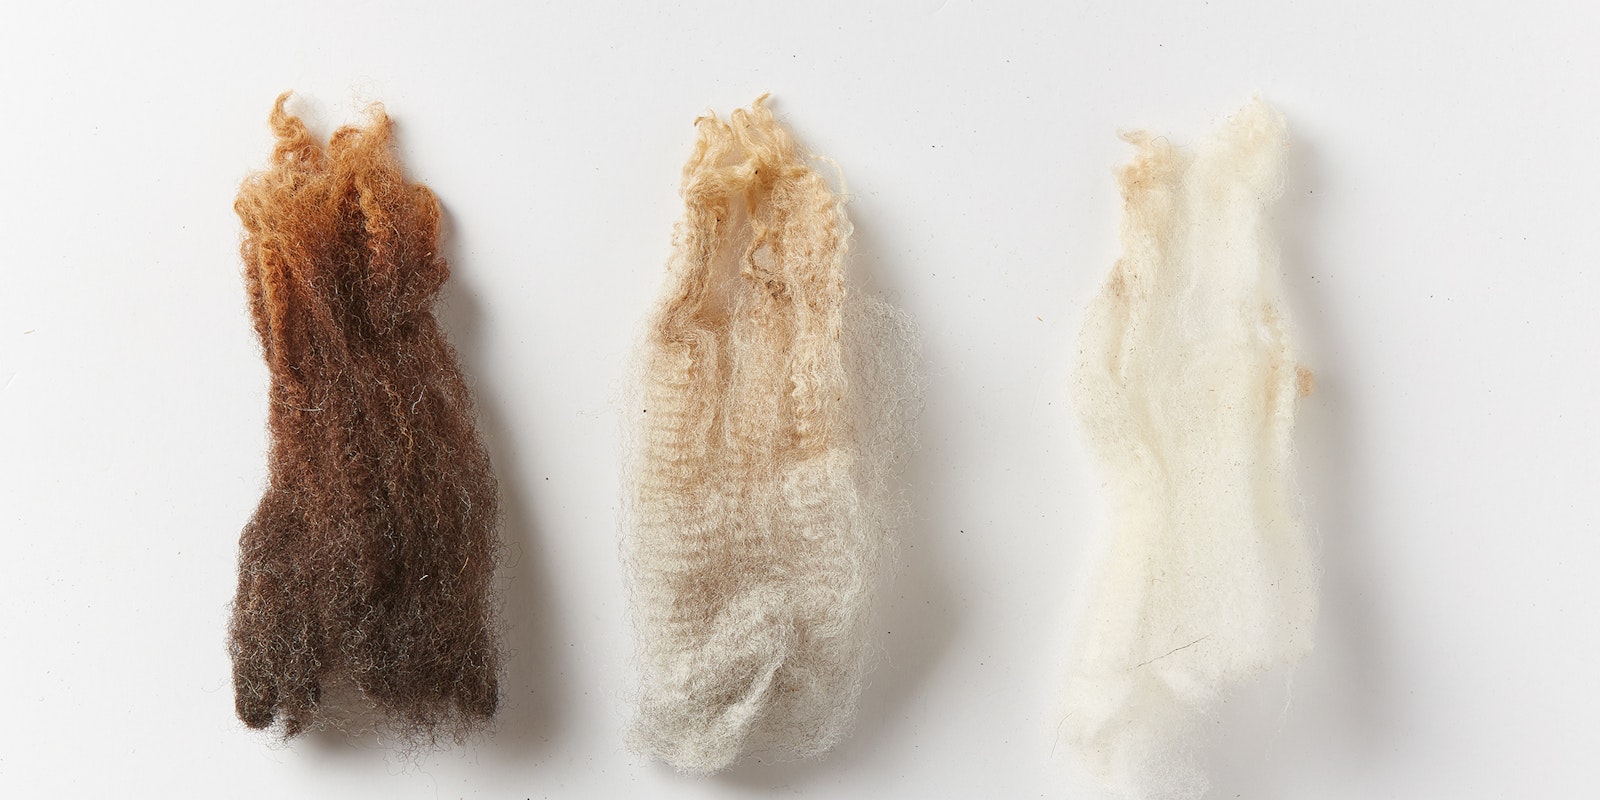 Wool, Hair, and Kemp: What's in a Fleece? | Spin Off